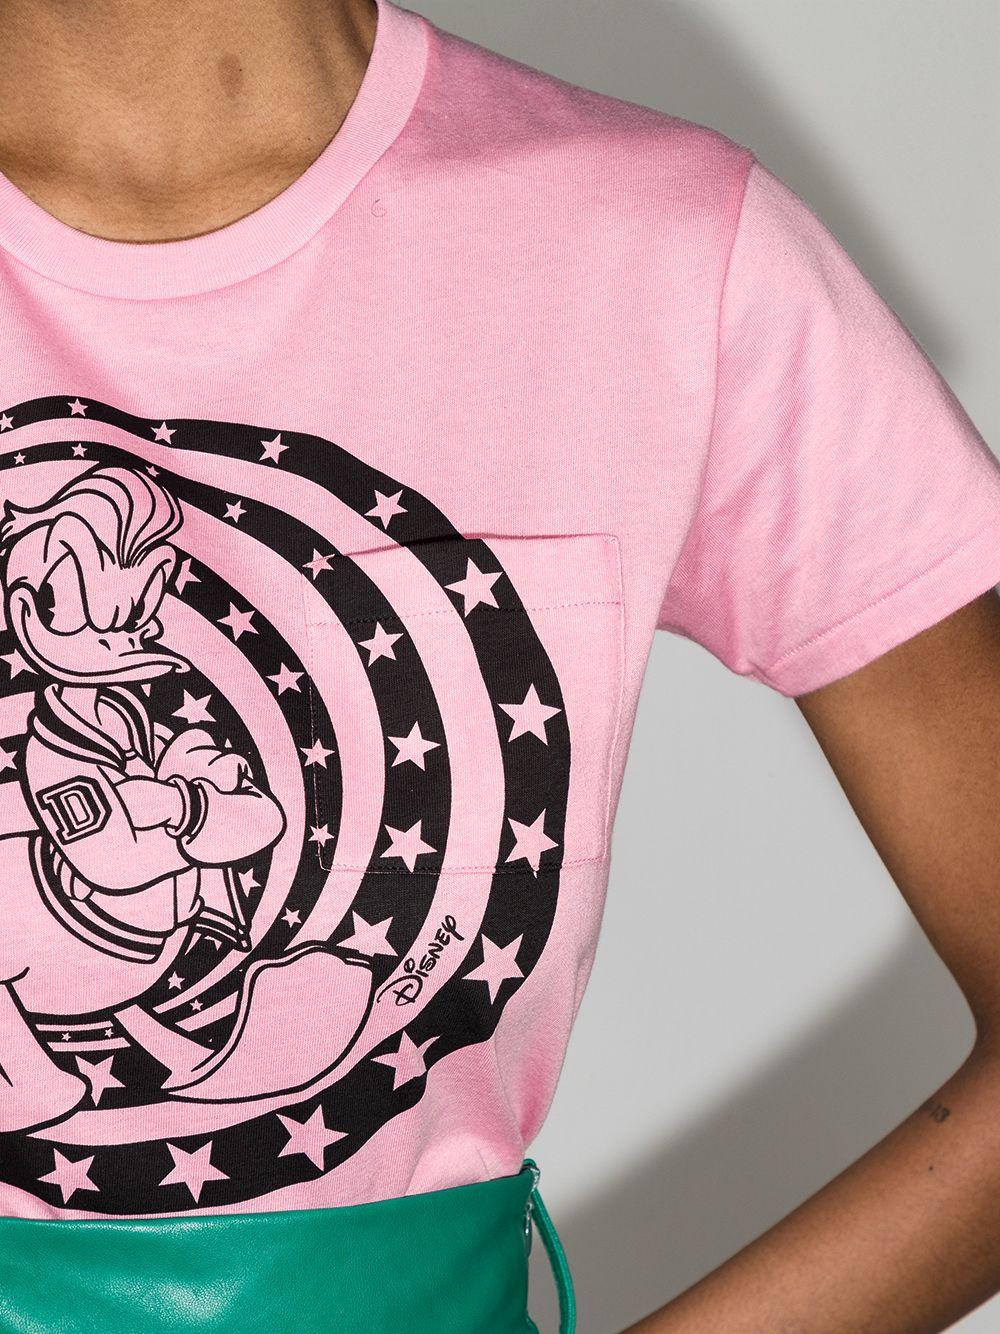 Gucci X Disney Donald Duck Cropped T-shirt in Pink | Lyst